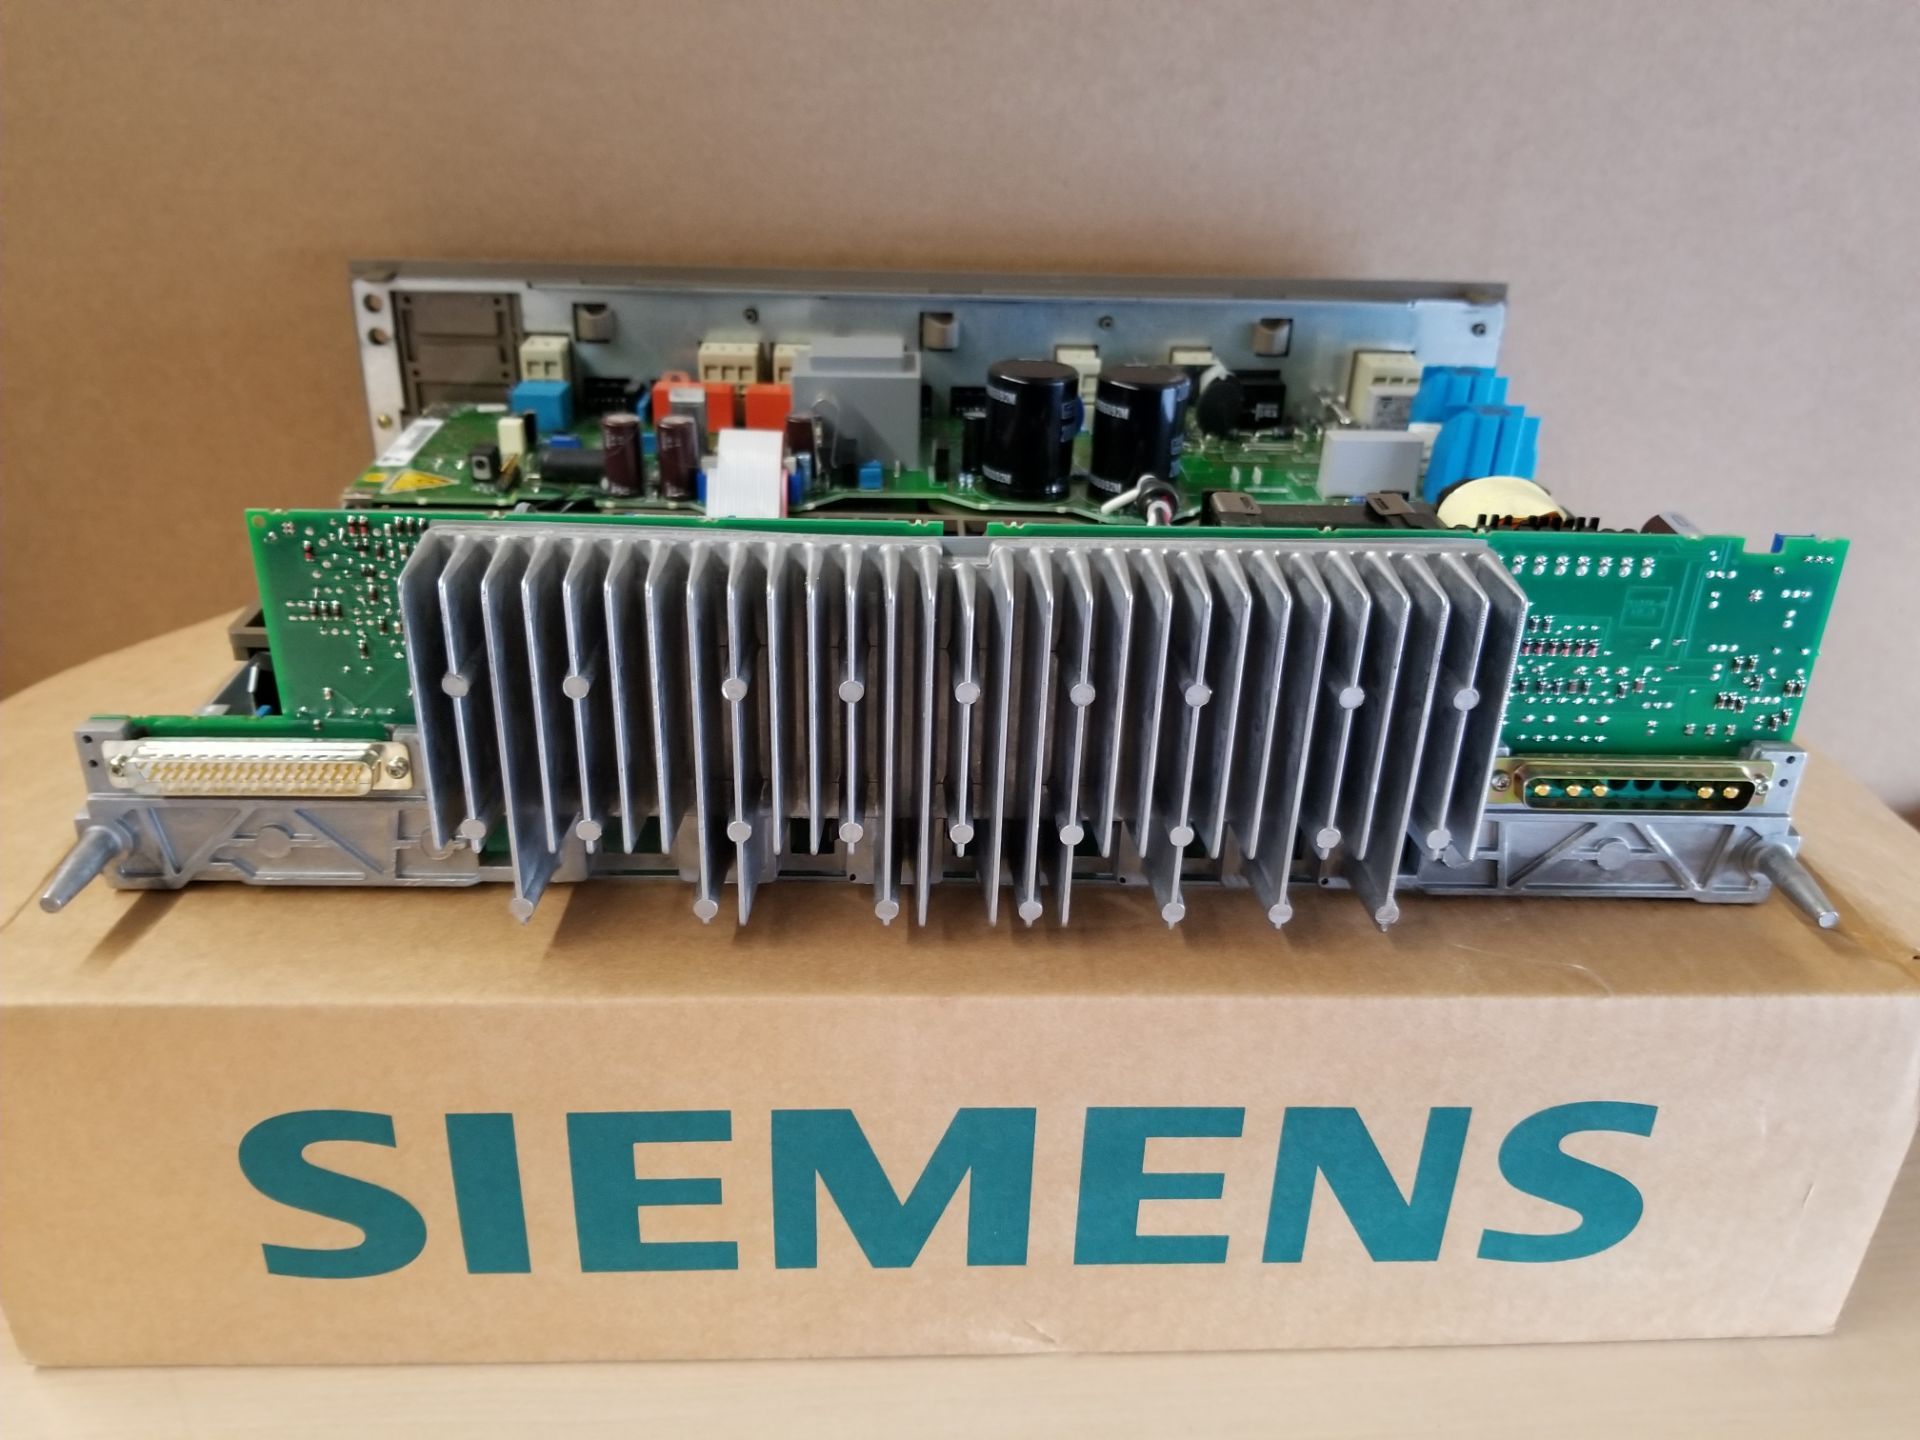 NEW SIEMENS SIMATIC S5 PLC POWER SUPPLY - Image 3 of 4